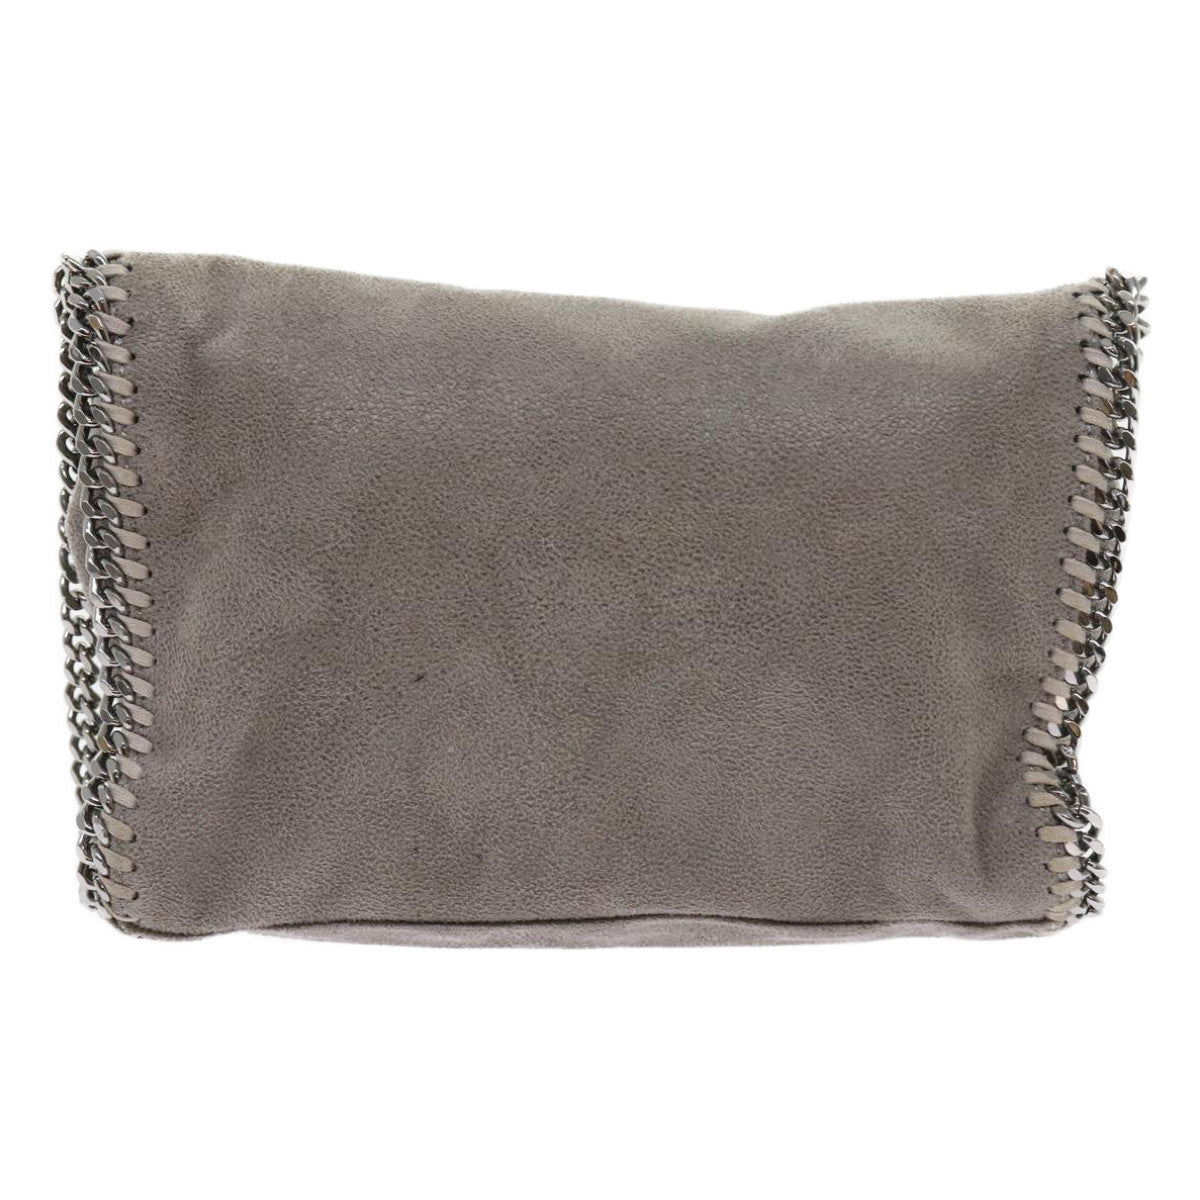 Stella MacCartney Chain Shoulder Bag Suede Gray 364519 Auth bs8624